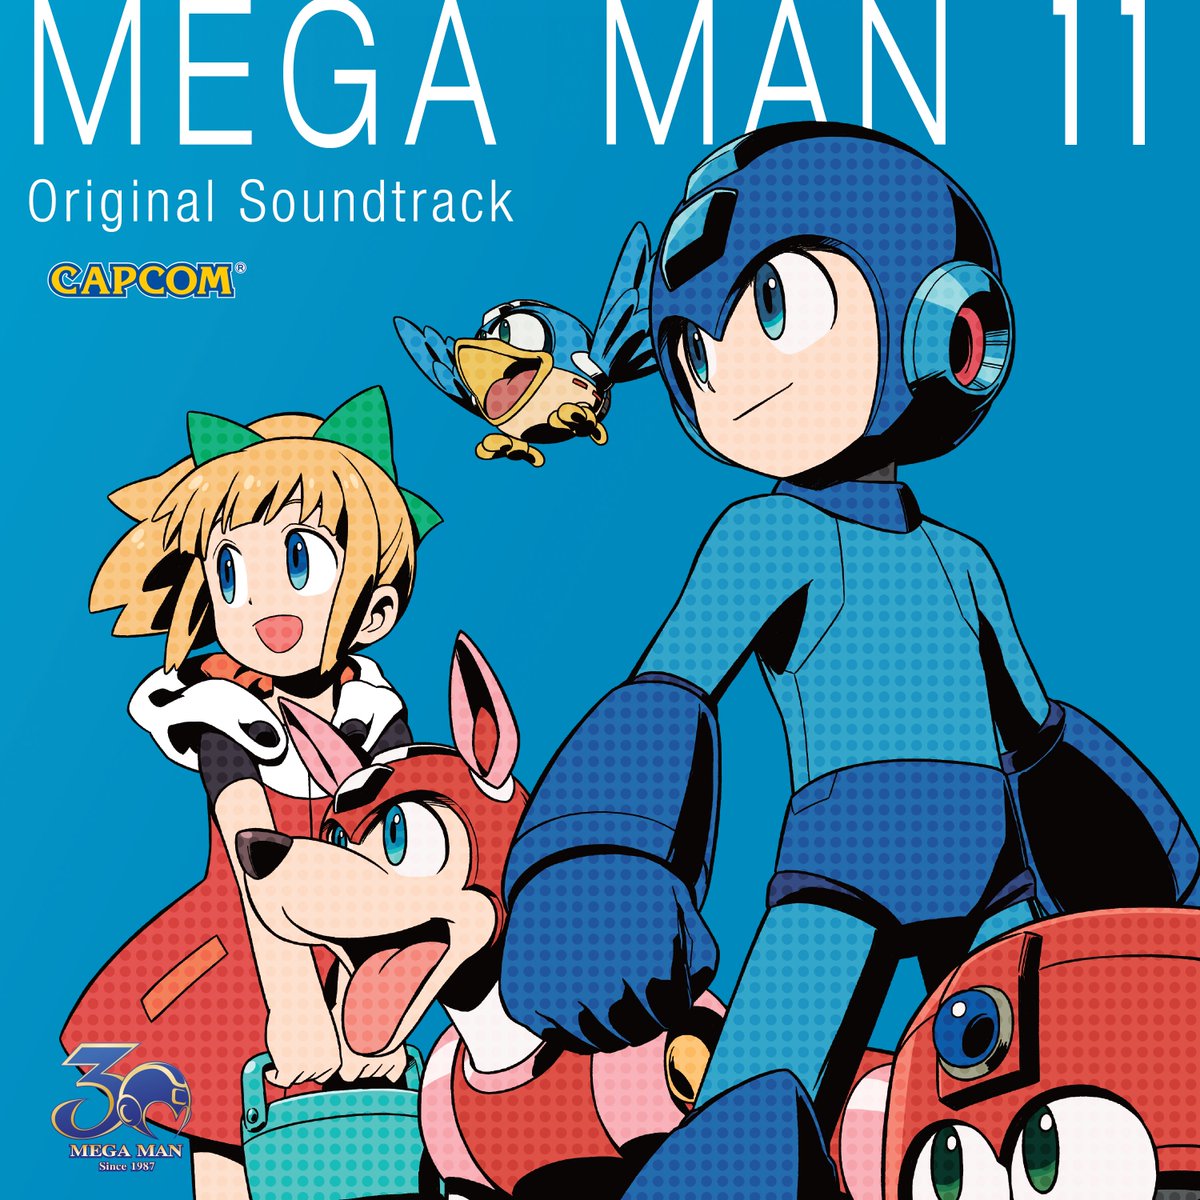 Mega Man en Twitter: Get equipped with ORIGINAL SOUNDTRACK! The Mega Man 11 OST is available now, featuring the game's high-energy music and unique arrangements! Grab it today: ▶️ https://t.co/57HbkW63Rb ▶️ https://t.co/0nmfgsrLcX